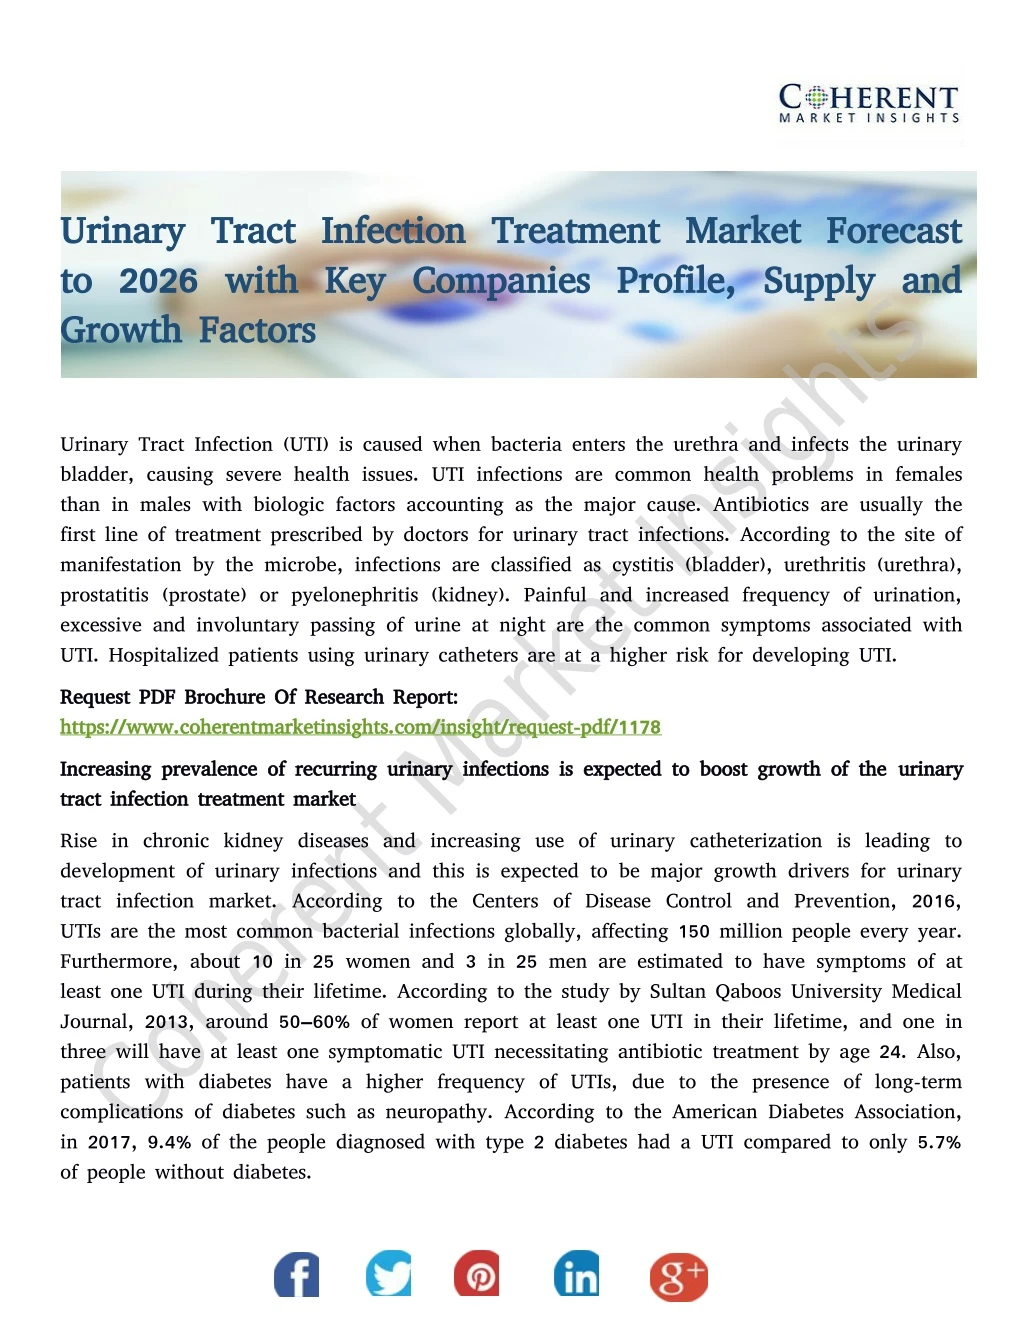 urinary tract infection treatment market forecast